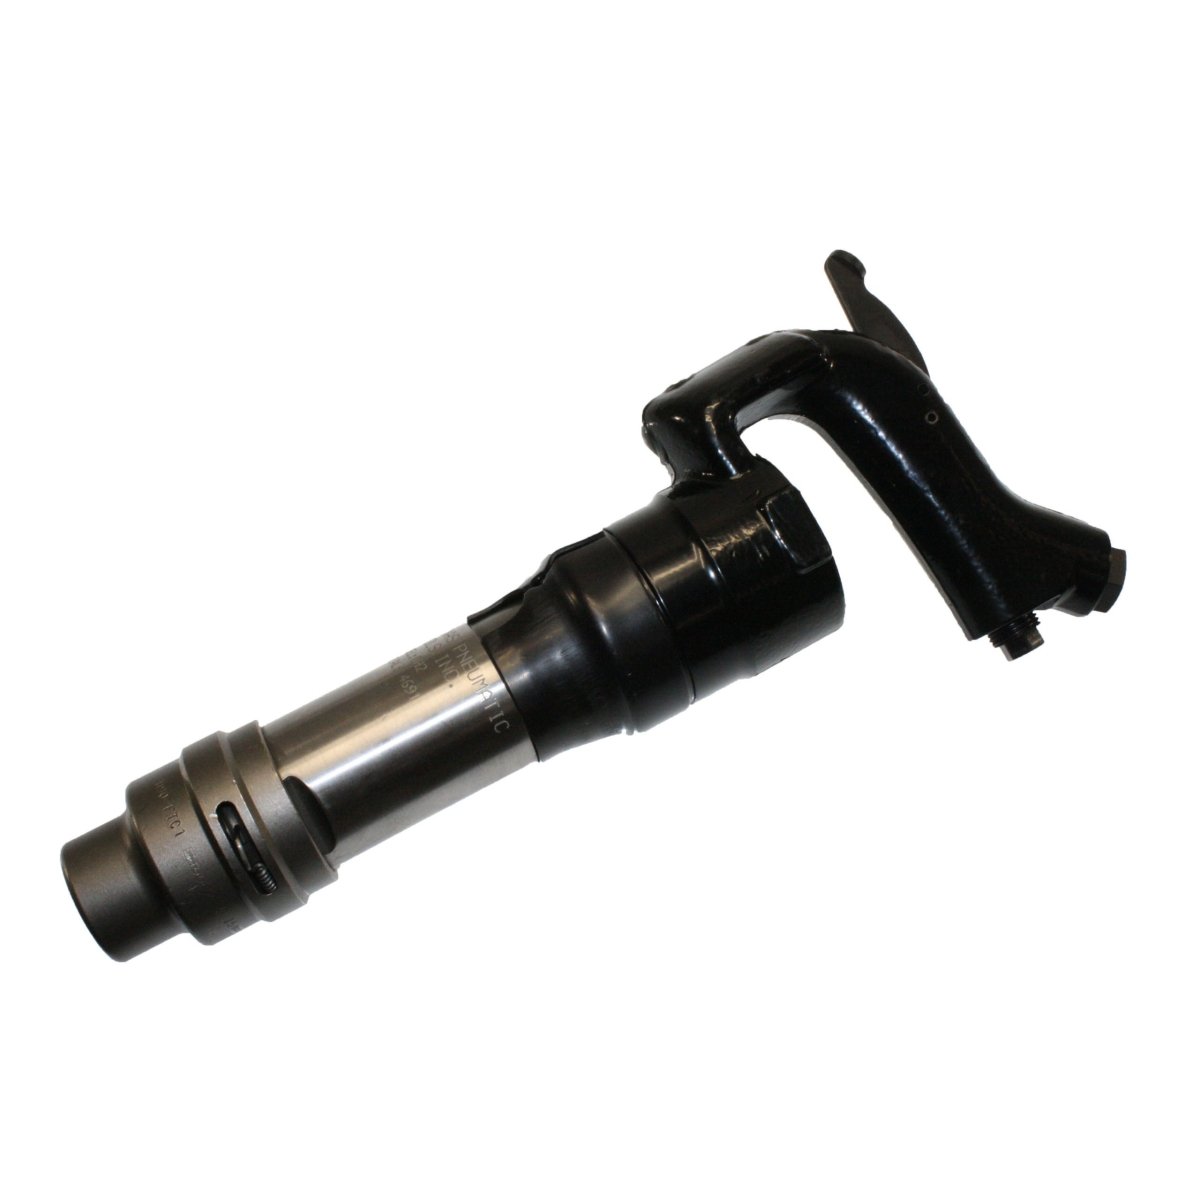  Round Bushing & Forged Handle - Texas Pneumatic Tools